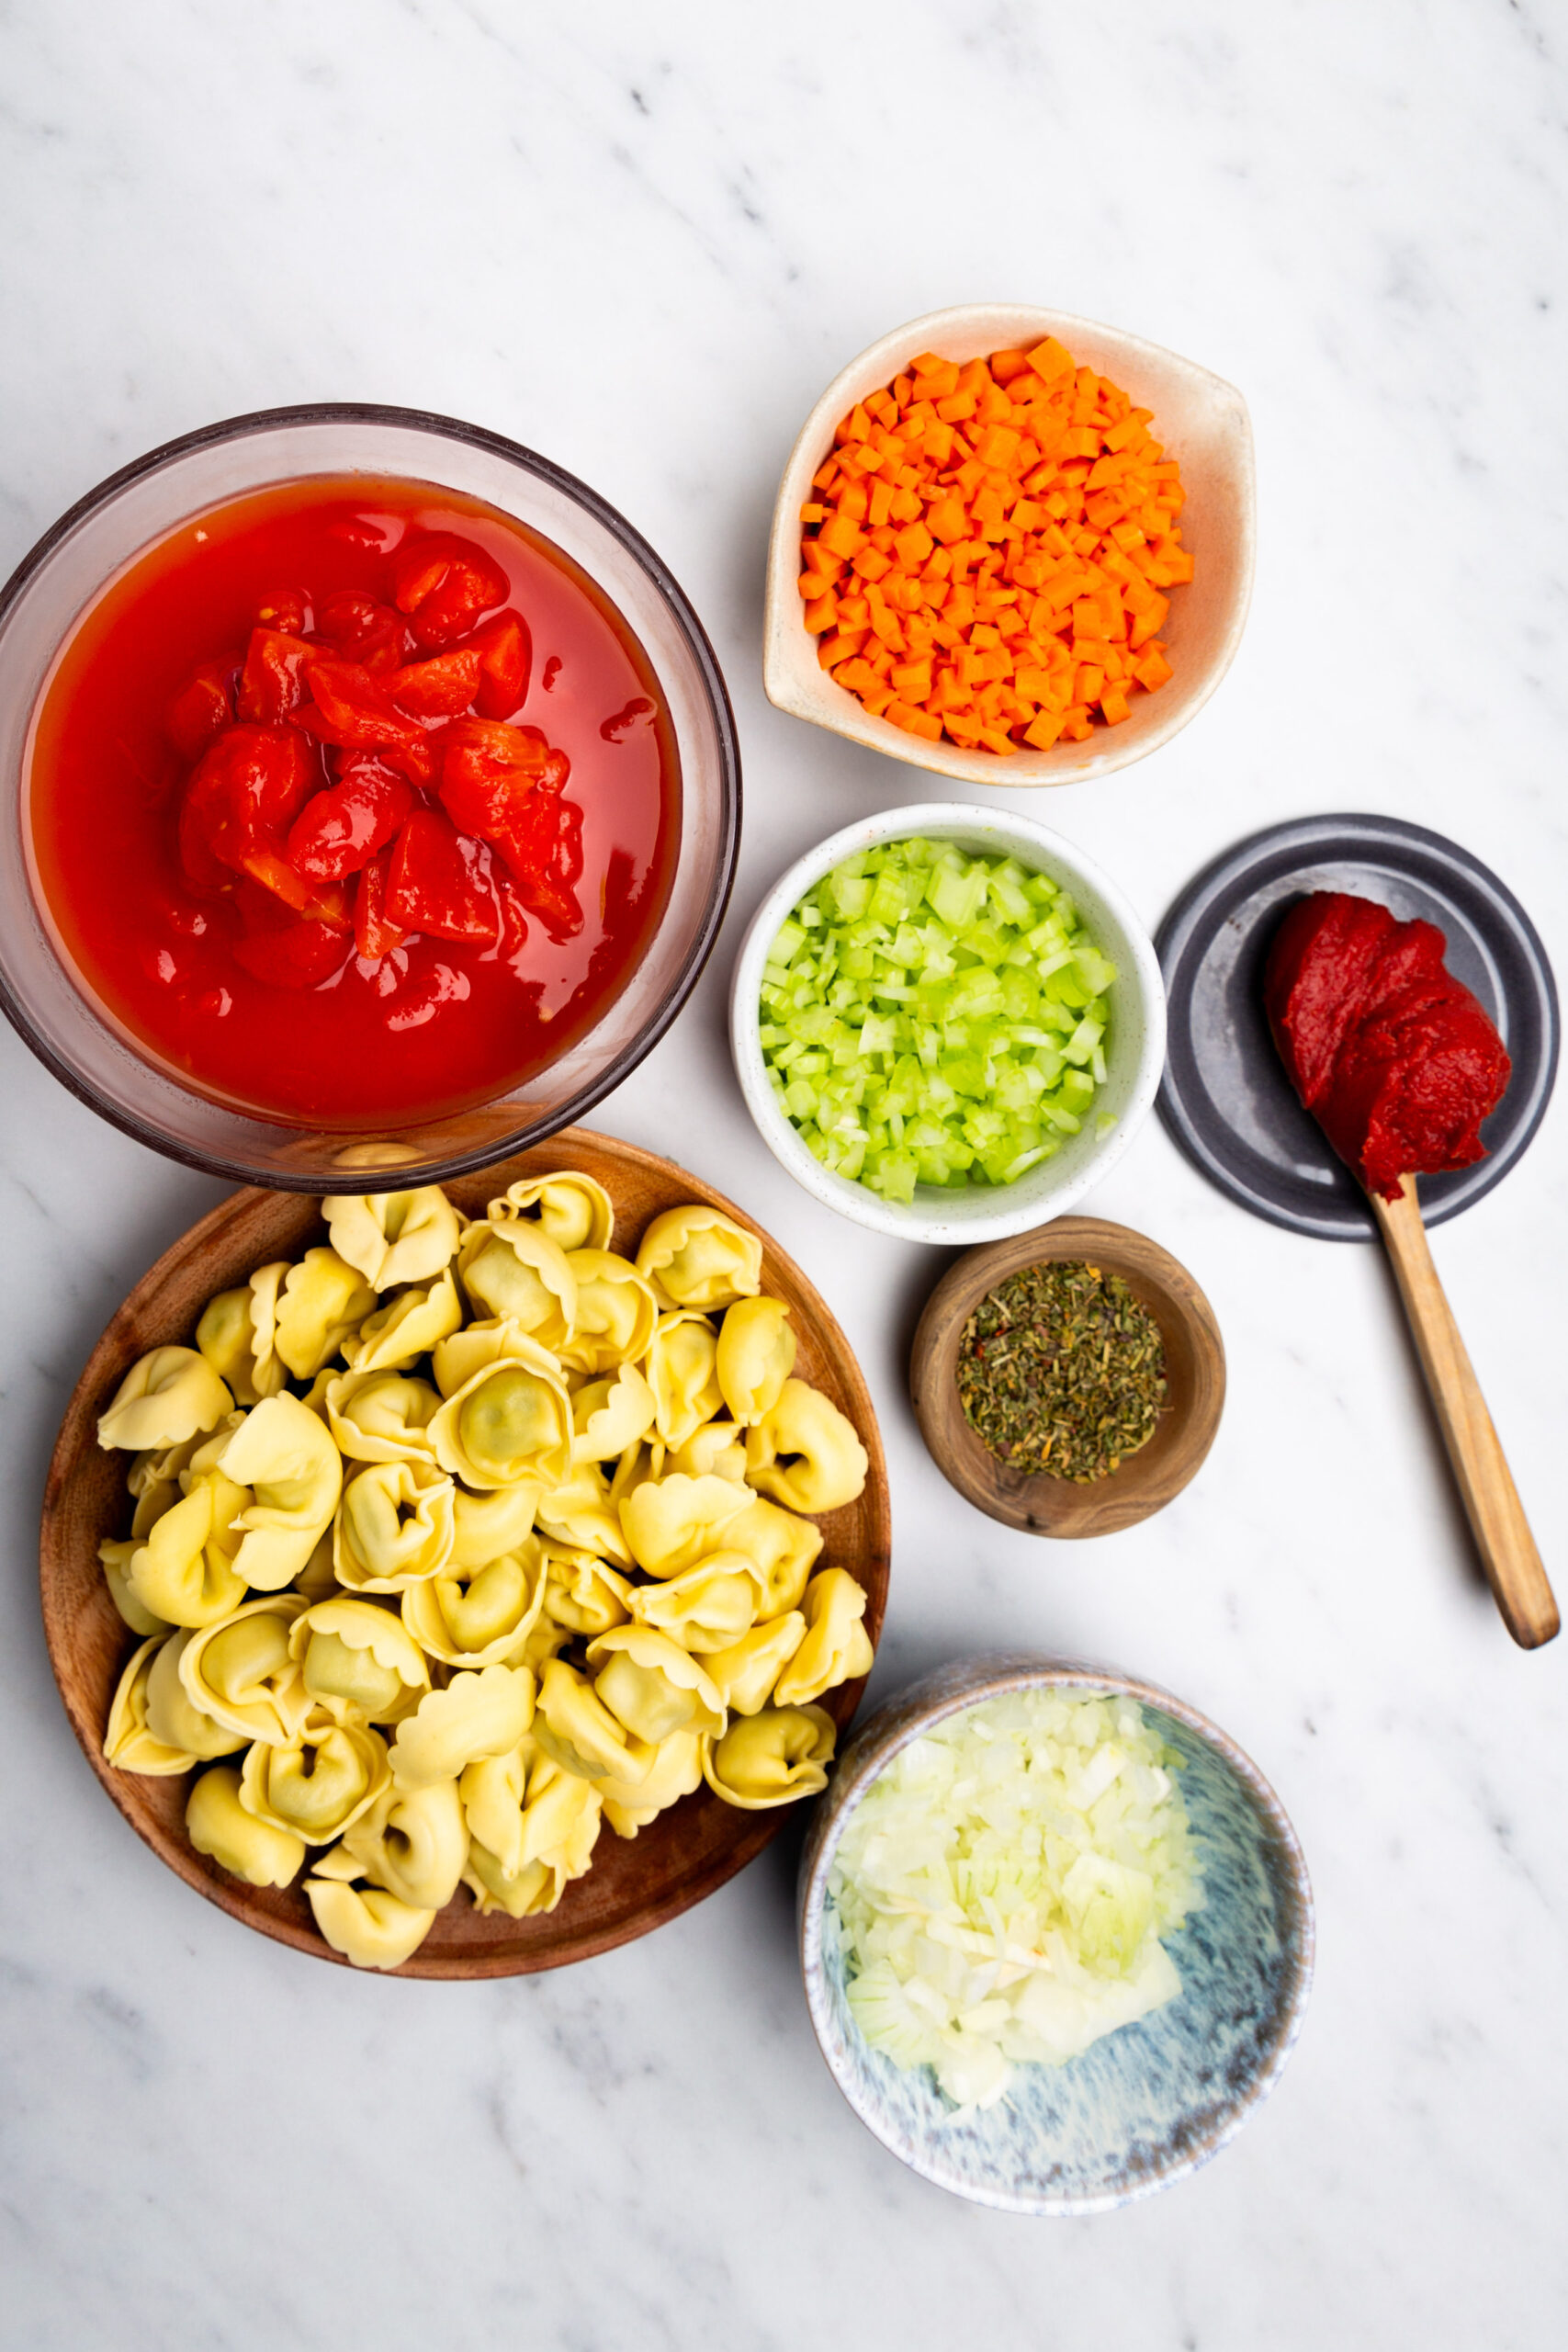 Description: Ingredients for a healthy and quick tortellini soup in tomato sauce.